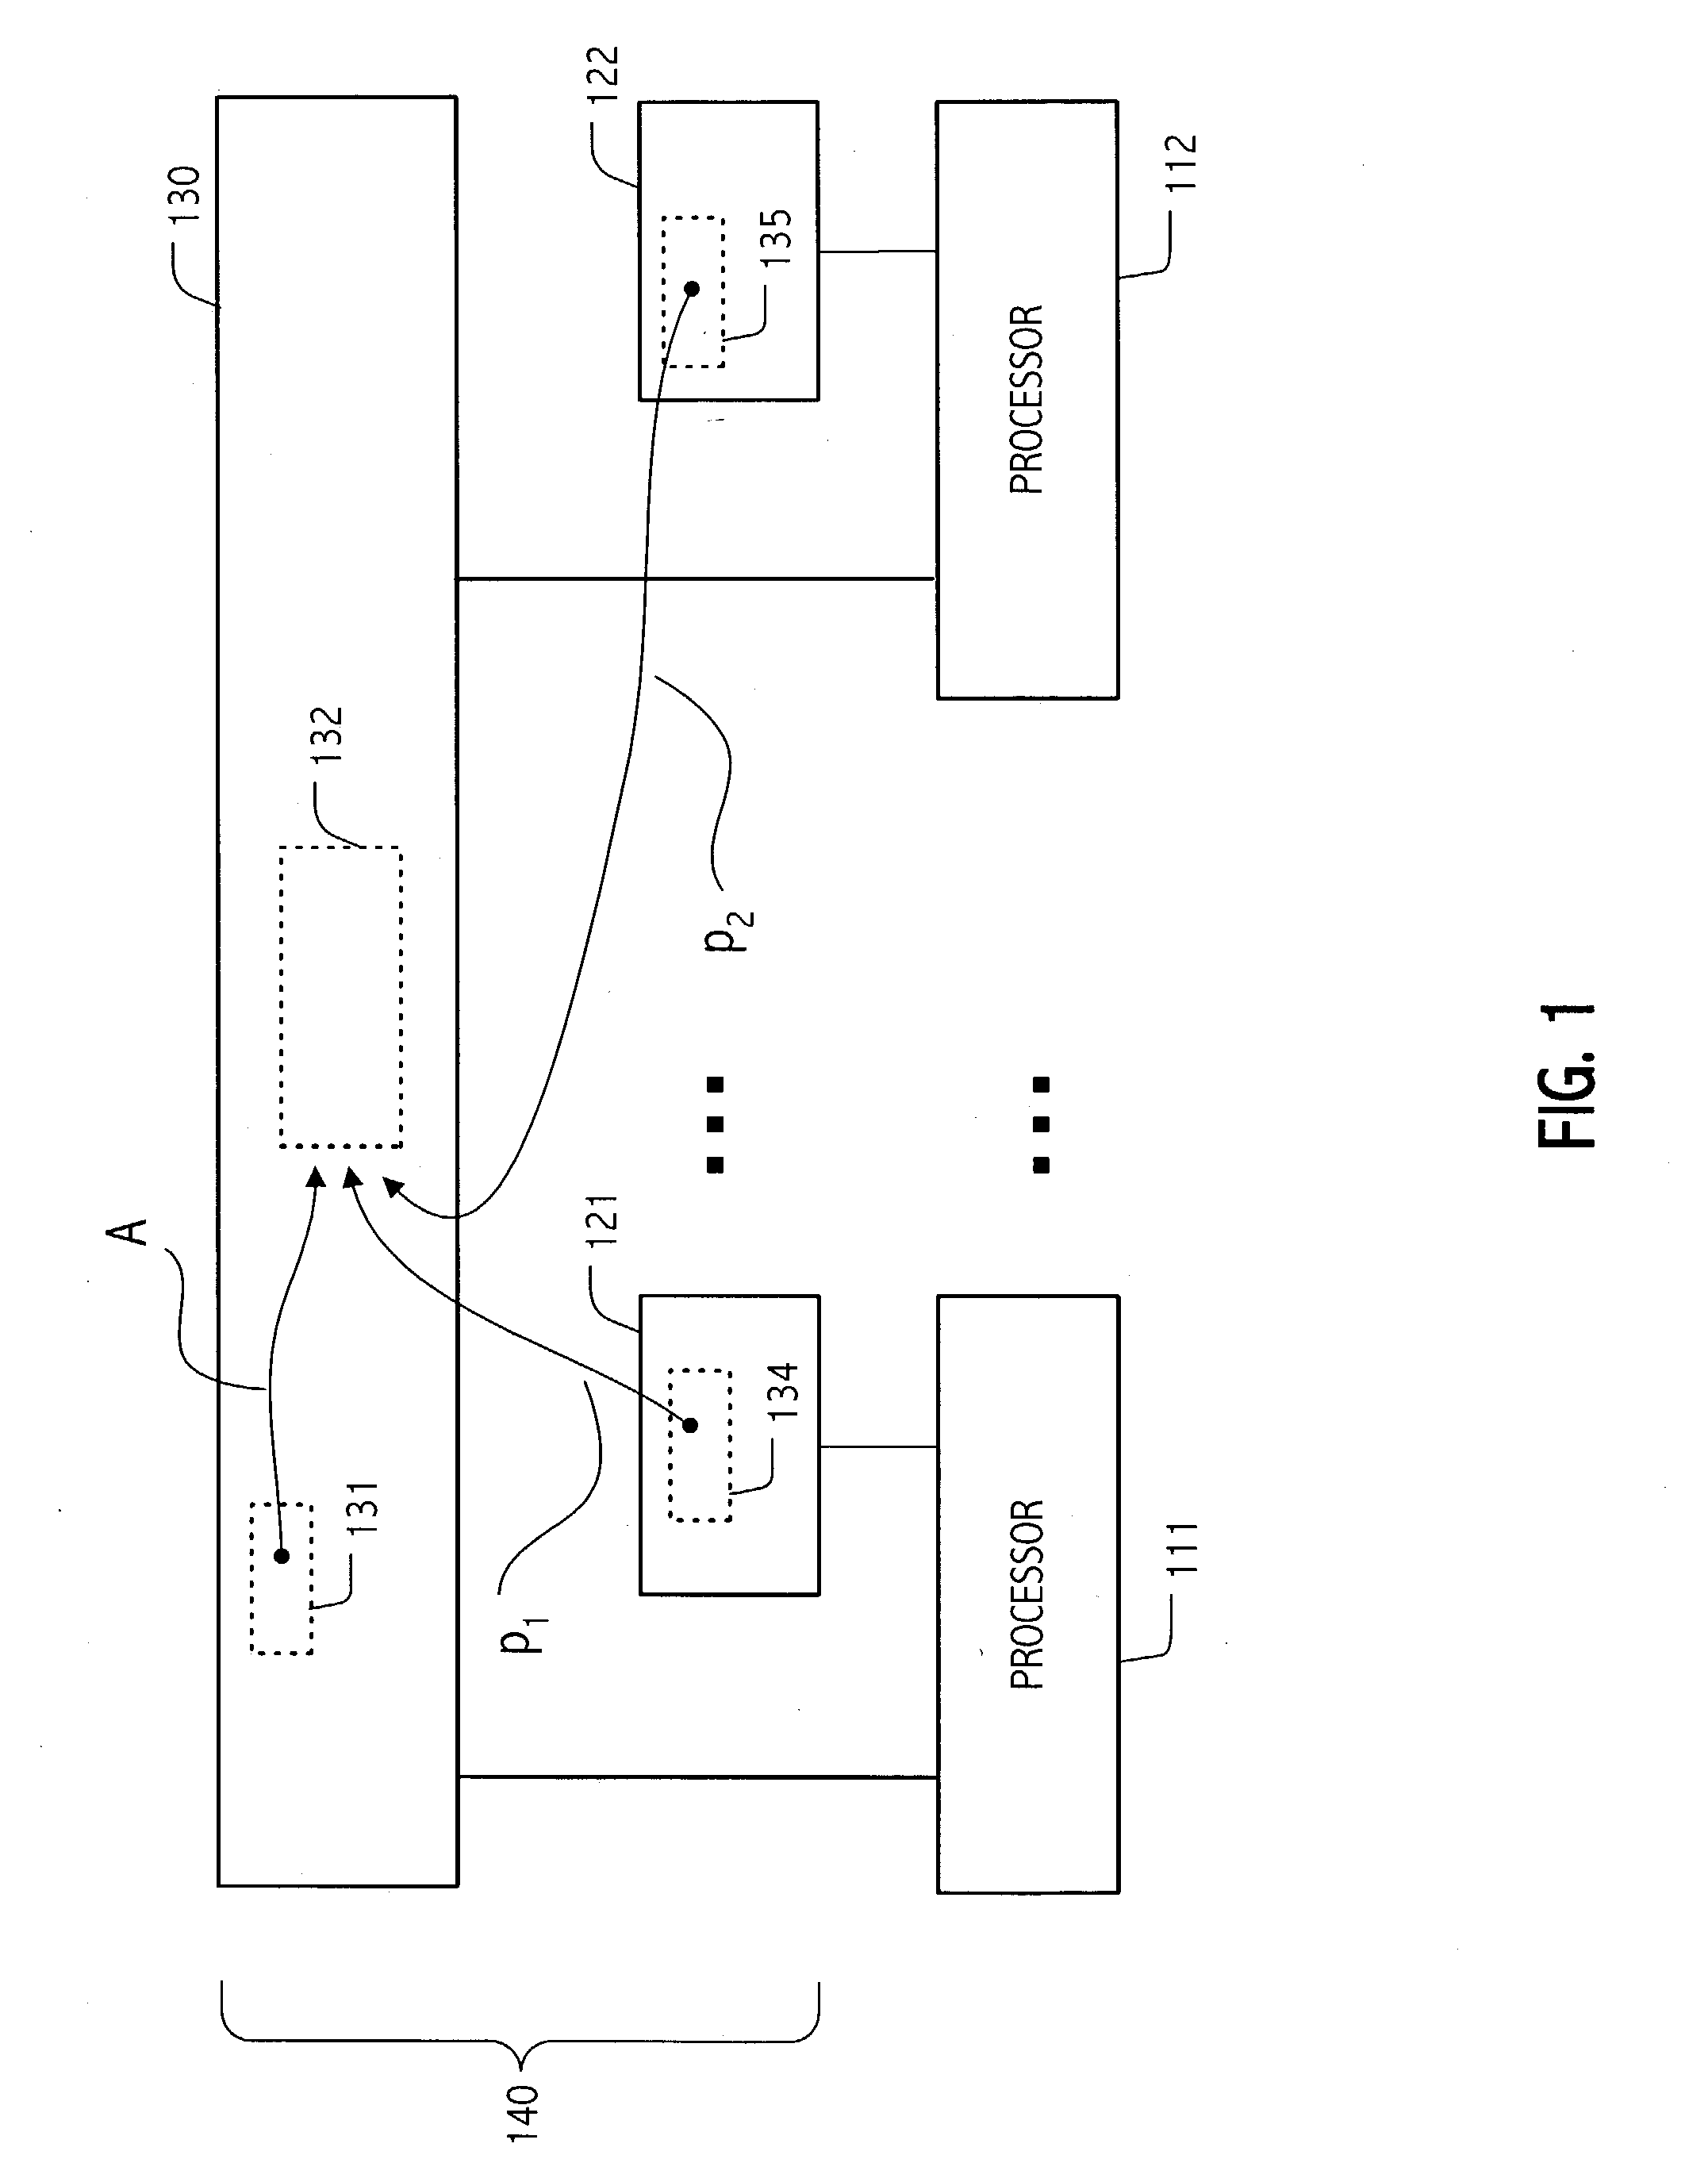 Non-blocking memory management mechanism for supporting dynamic-sized data structures